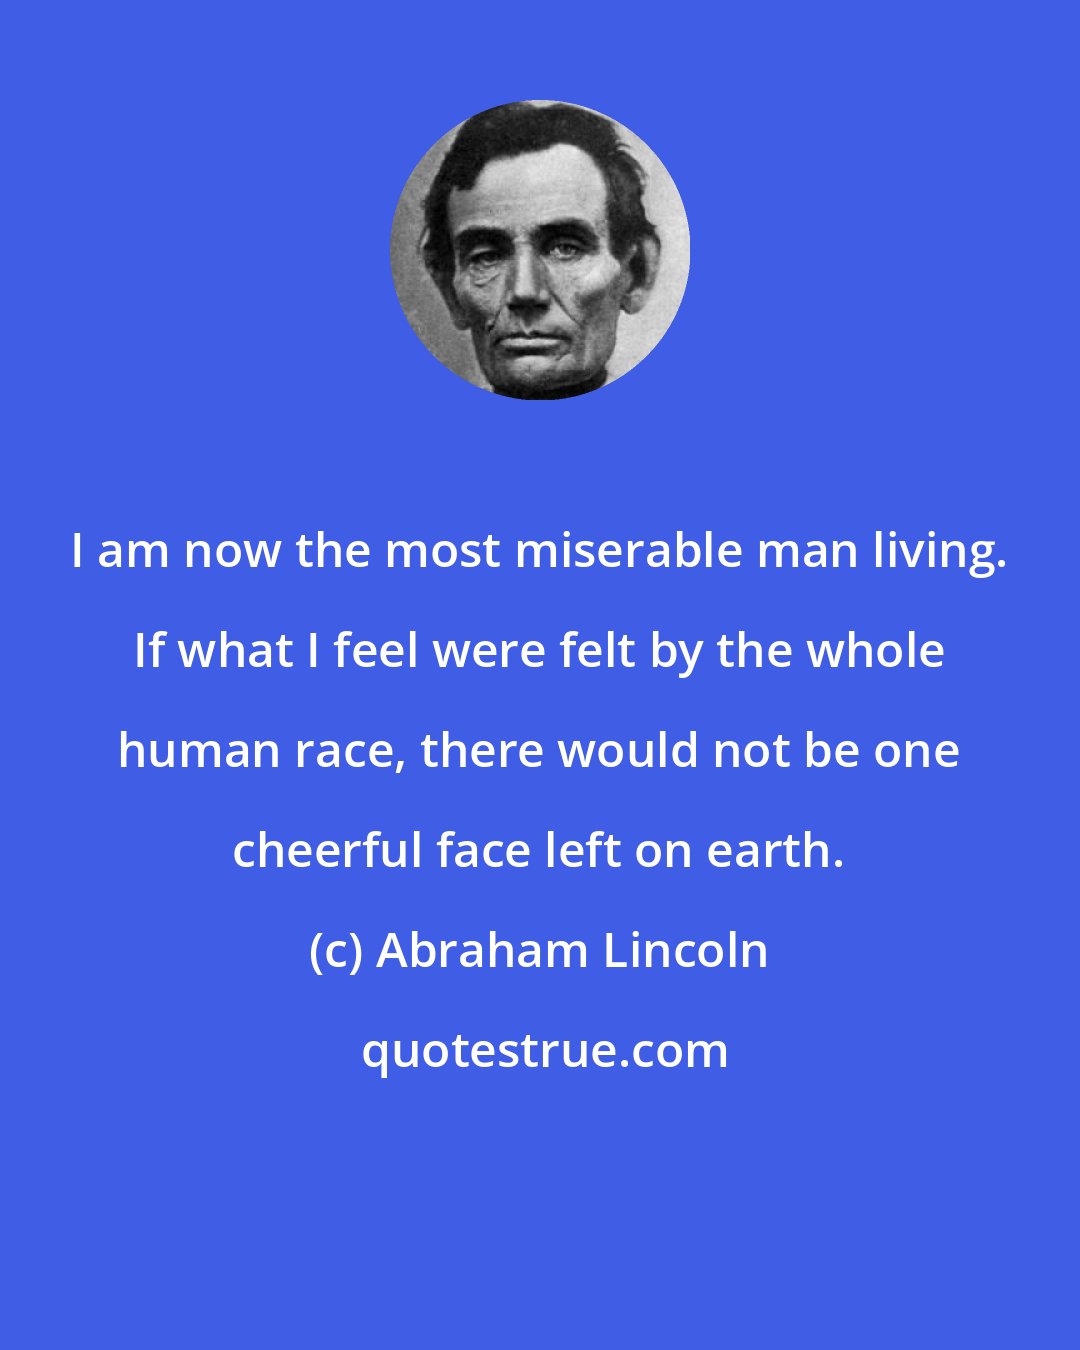 Abraham Lincoln: I am now the most miserable man living. If what I feel were felt by the whole human race, there would not be one cheerful face left on earth.